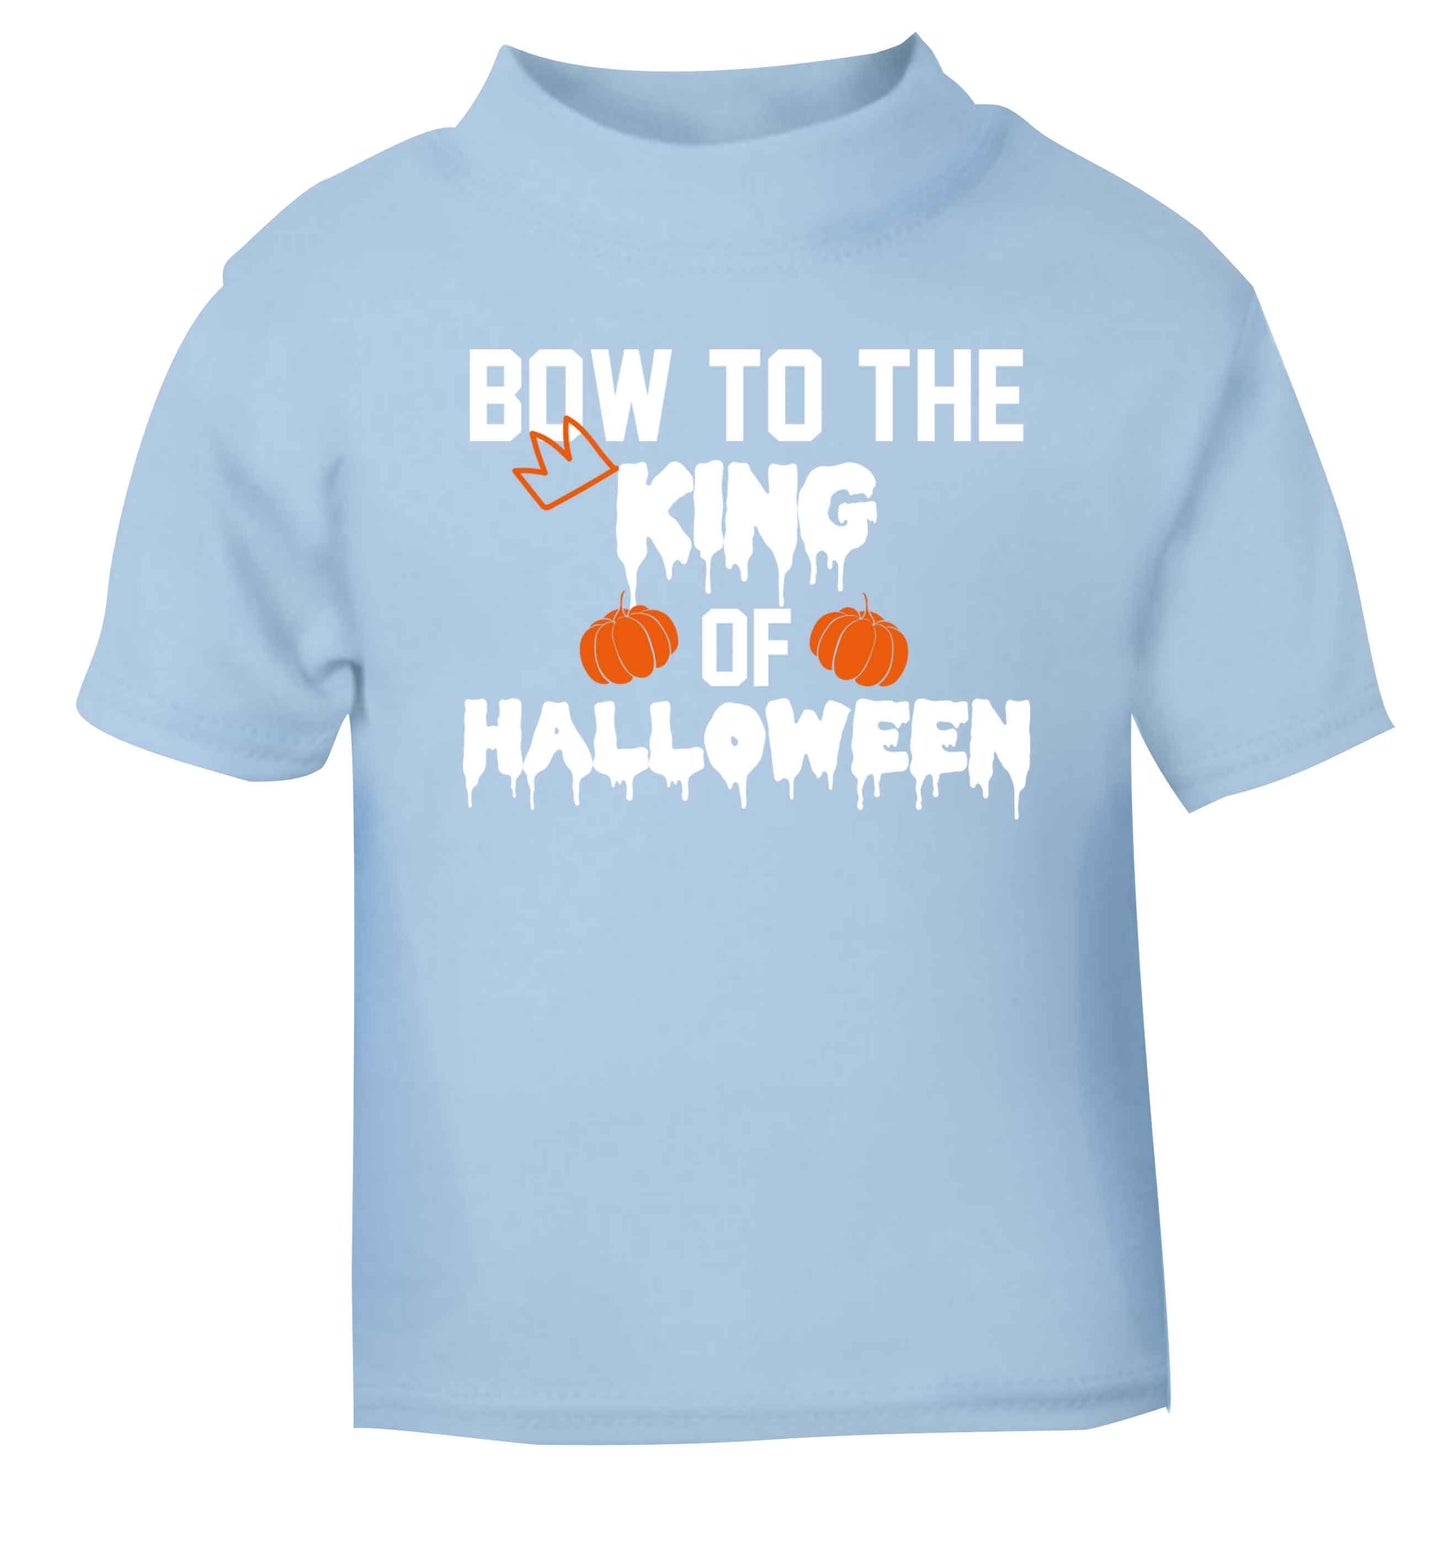 Bow to the King of halloween light blue baby toddler Tshirt 2 Years